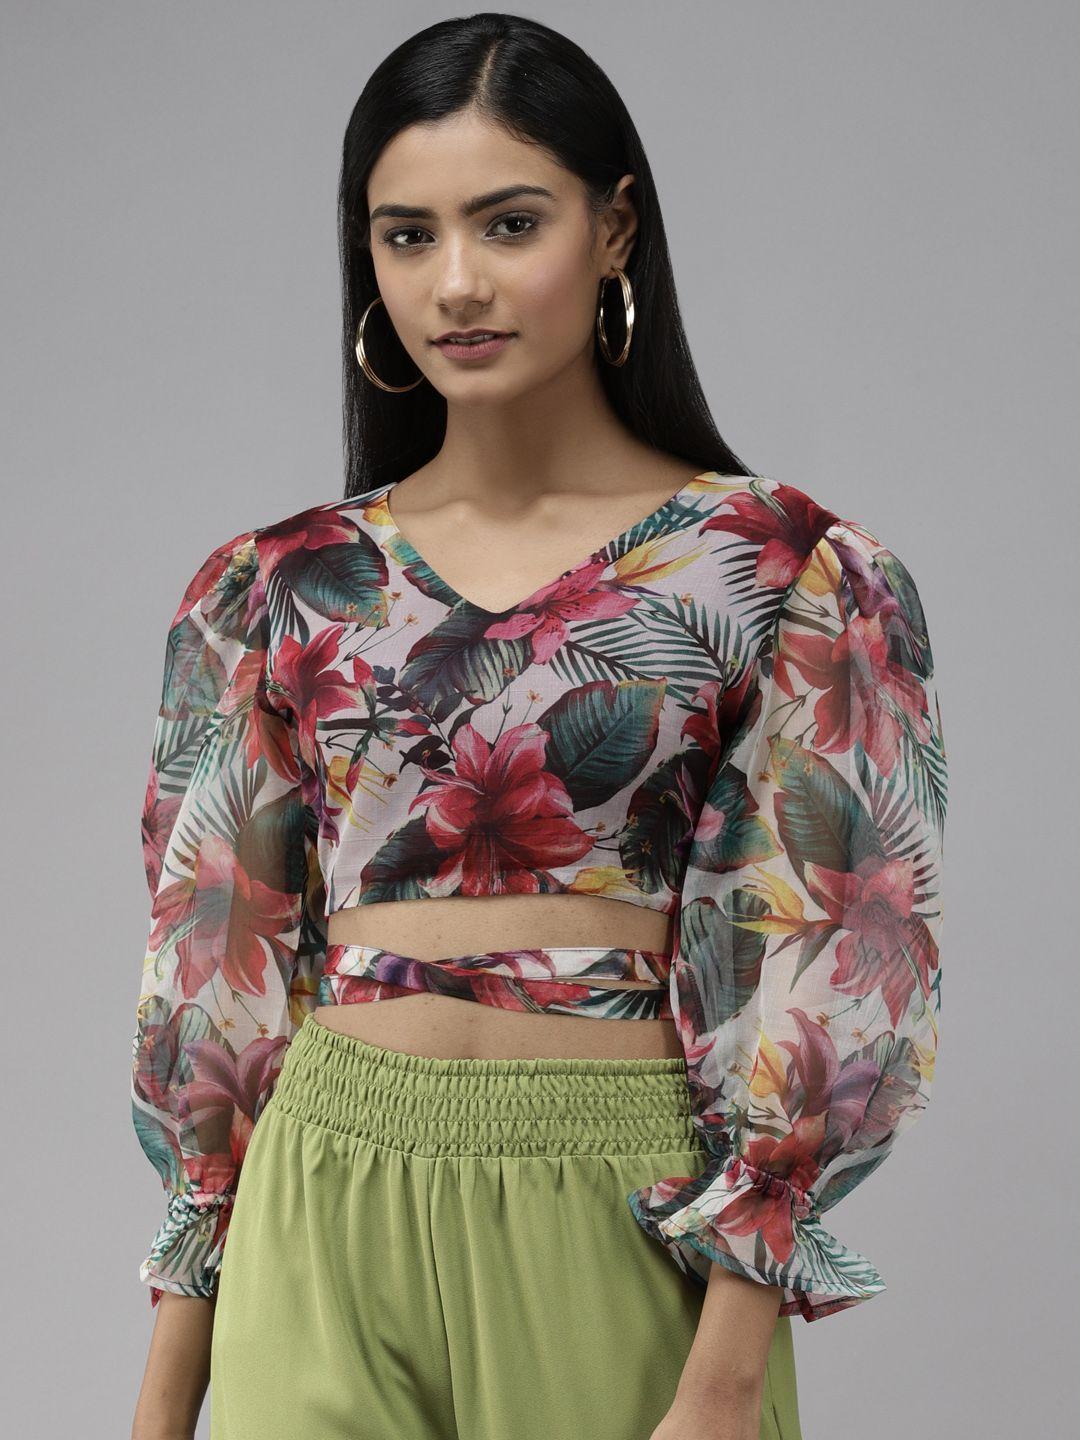 the dry state maroon & green floral print tropical chiffon blouson crop top